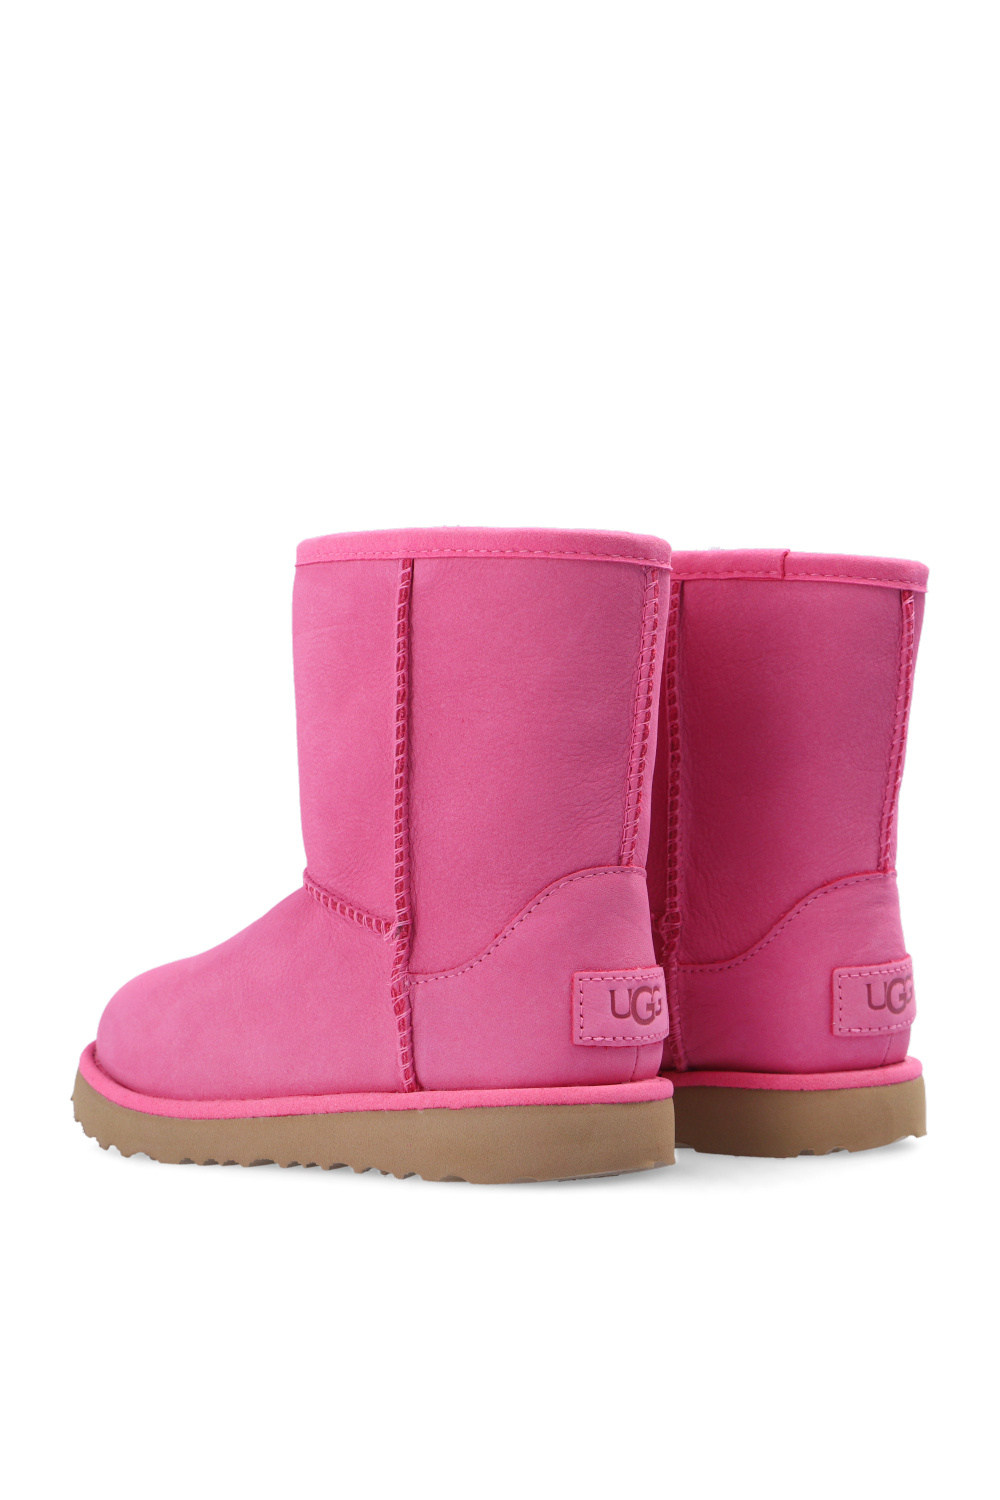 ugg MGOR Kids ‘Classic Weather Short’ snow boots